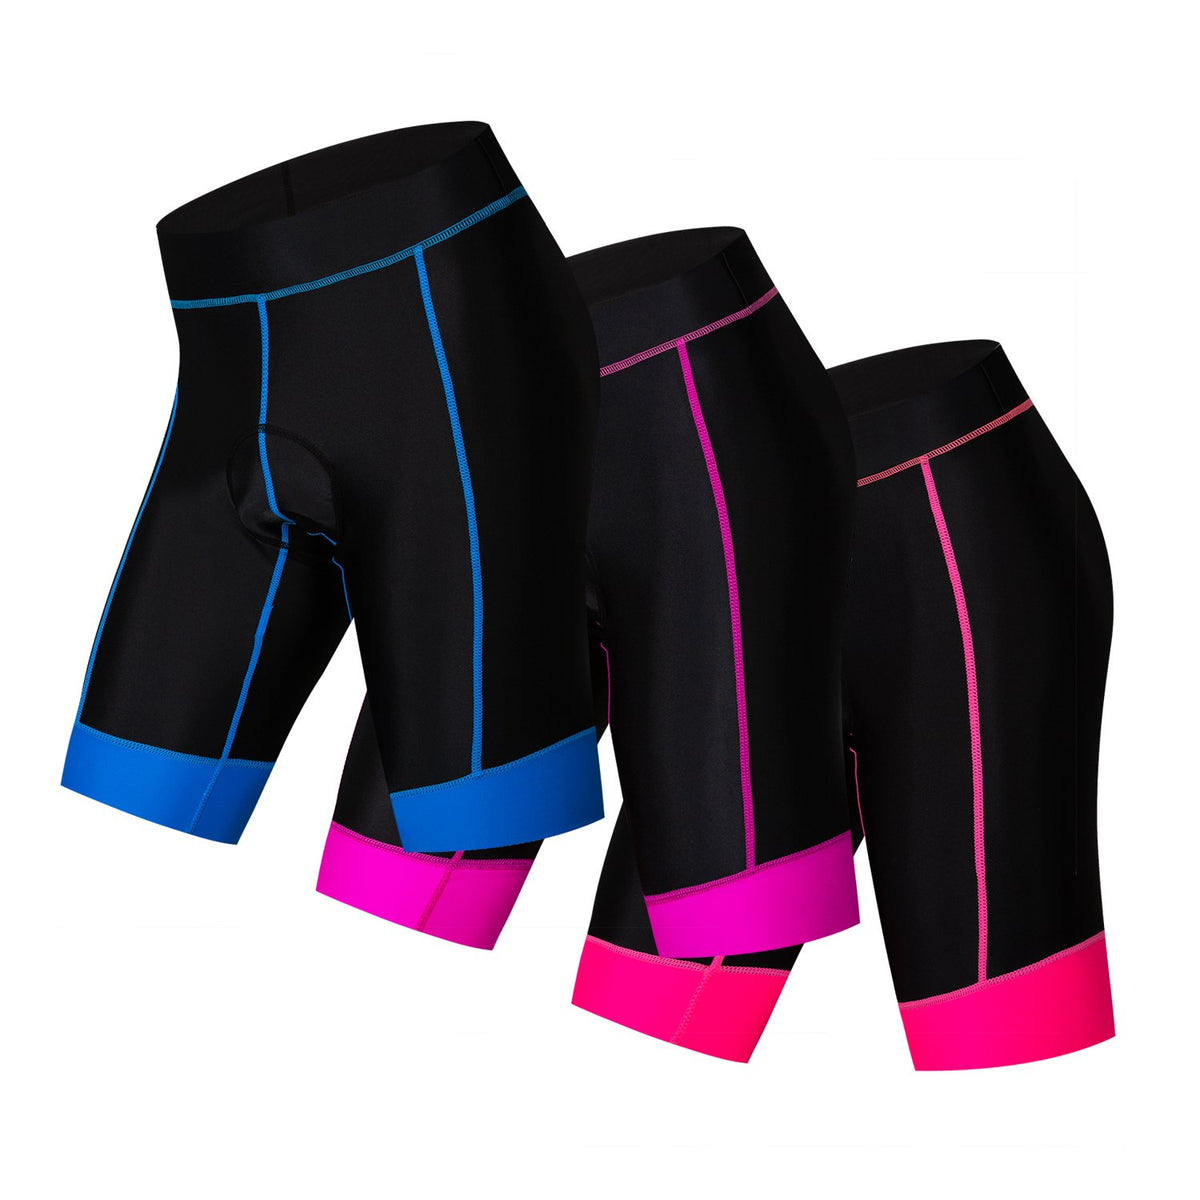 Black Women's Cycling Shorts in 3 Colors - Blue, Red, Purple